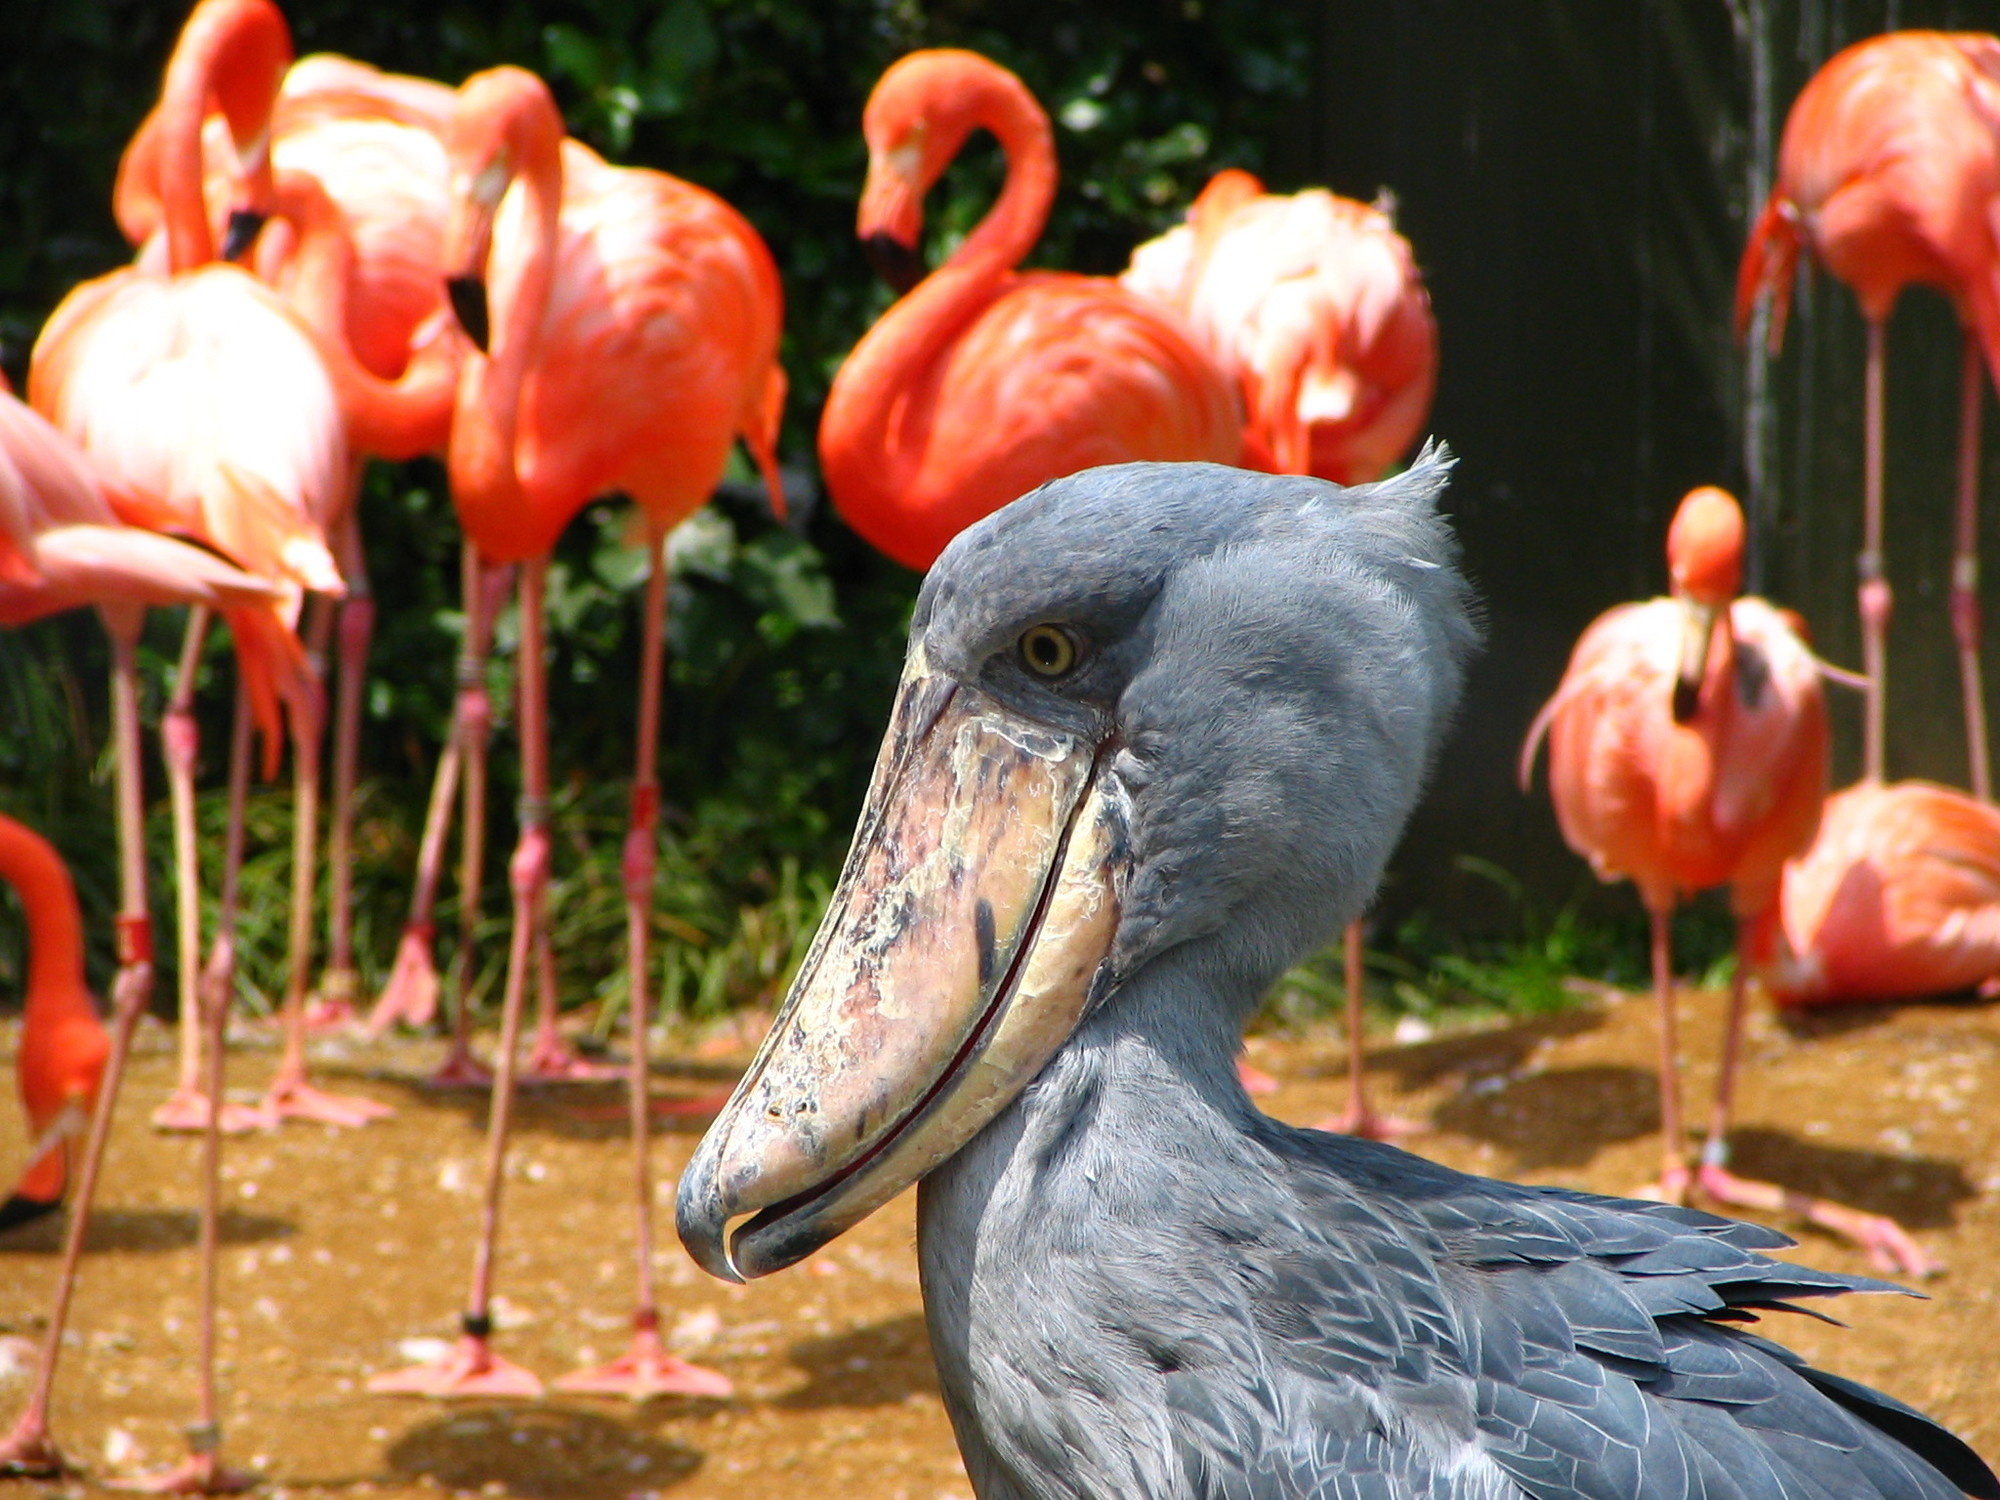 Have you ever seen a shoebill? Also called a whale-head and shoe-billed stork, this peculiar looking bird can live up to 35 years in the wild. Shoebills are native to eastern Africa and are considered a vulnerable species. A tall bird, some can grow up to 5 feet tall!